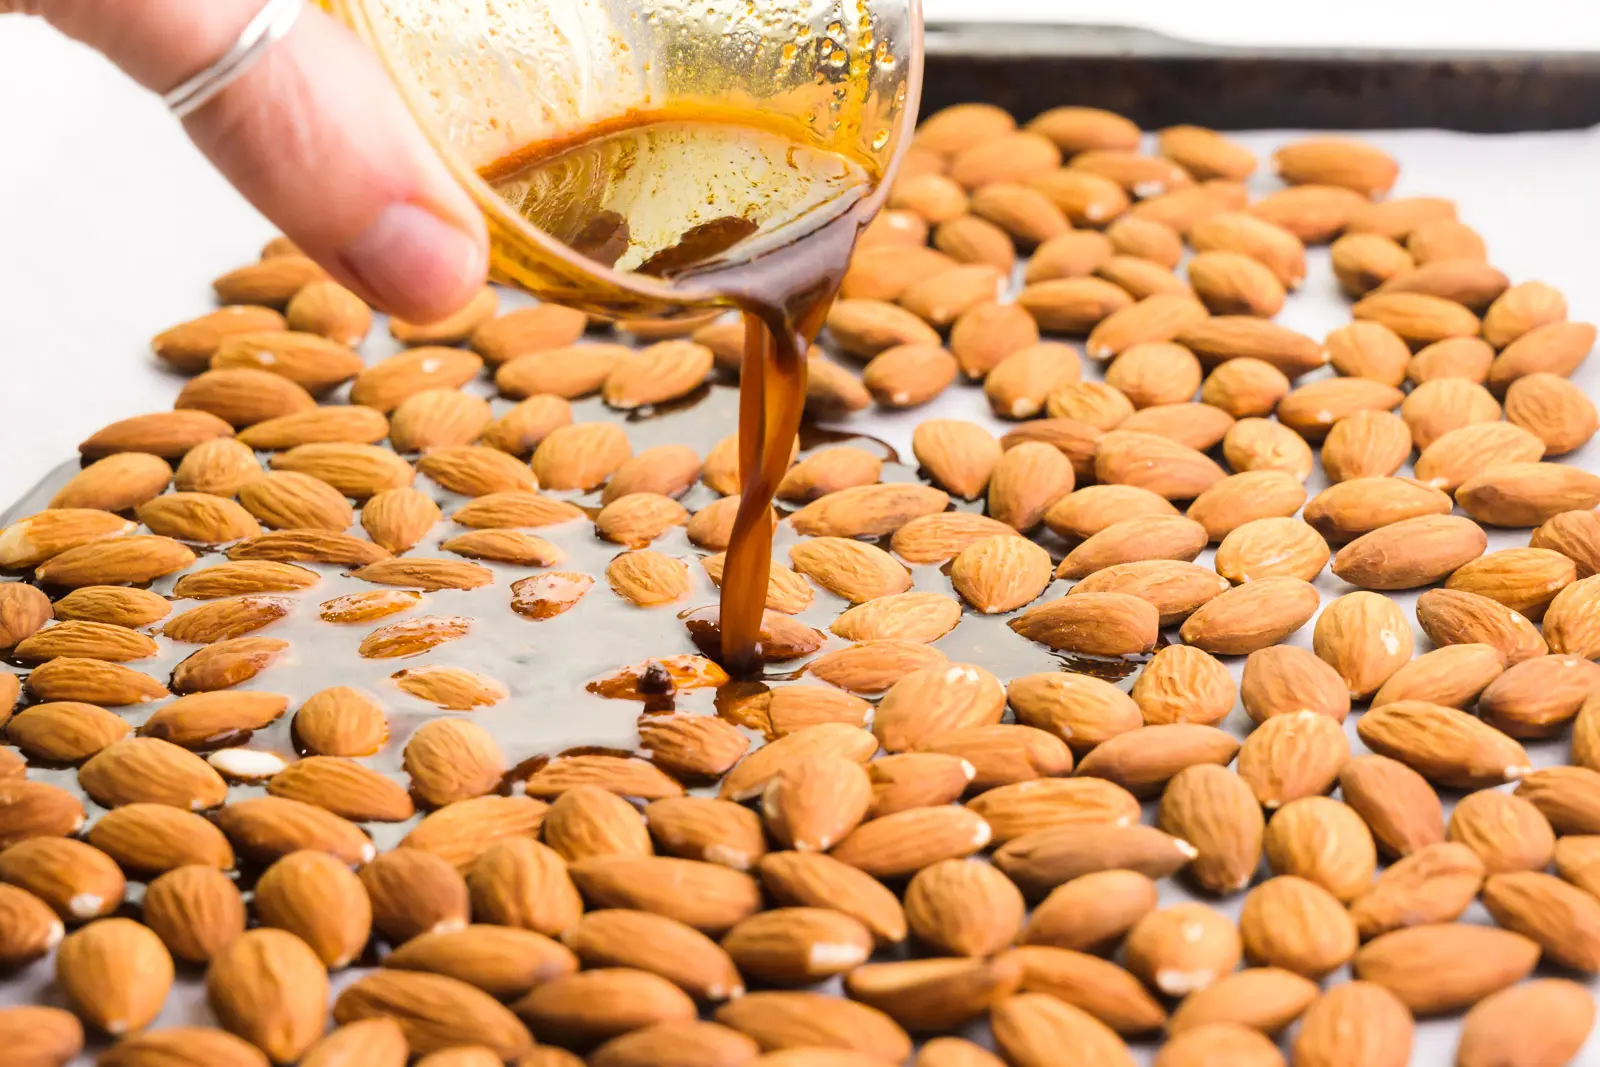 A hand holds a bowl and pouring sauce over a pan full of almonds.